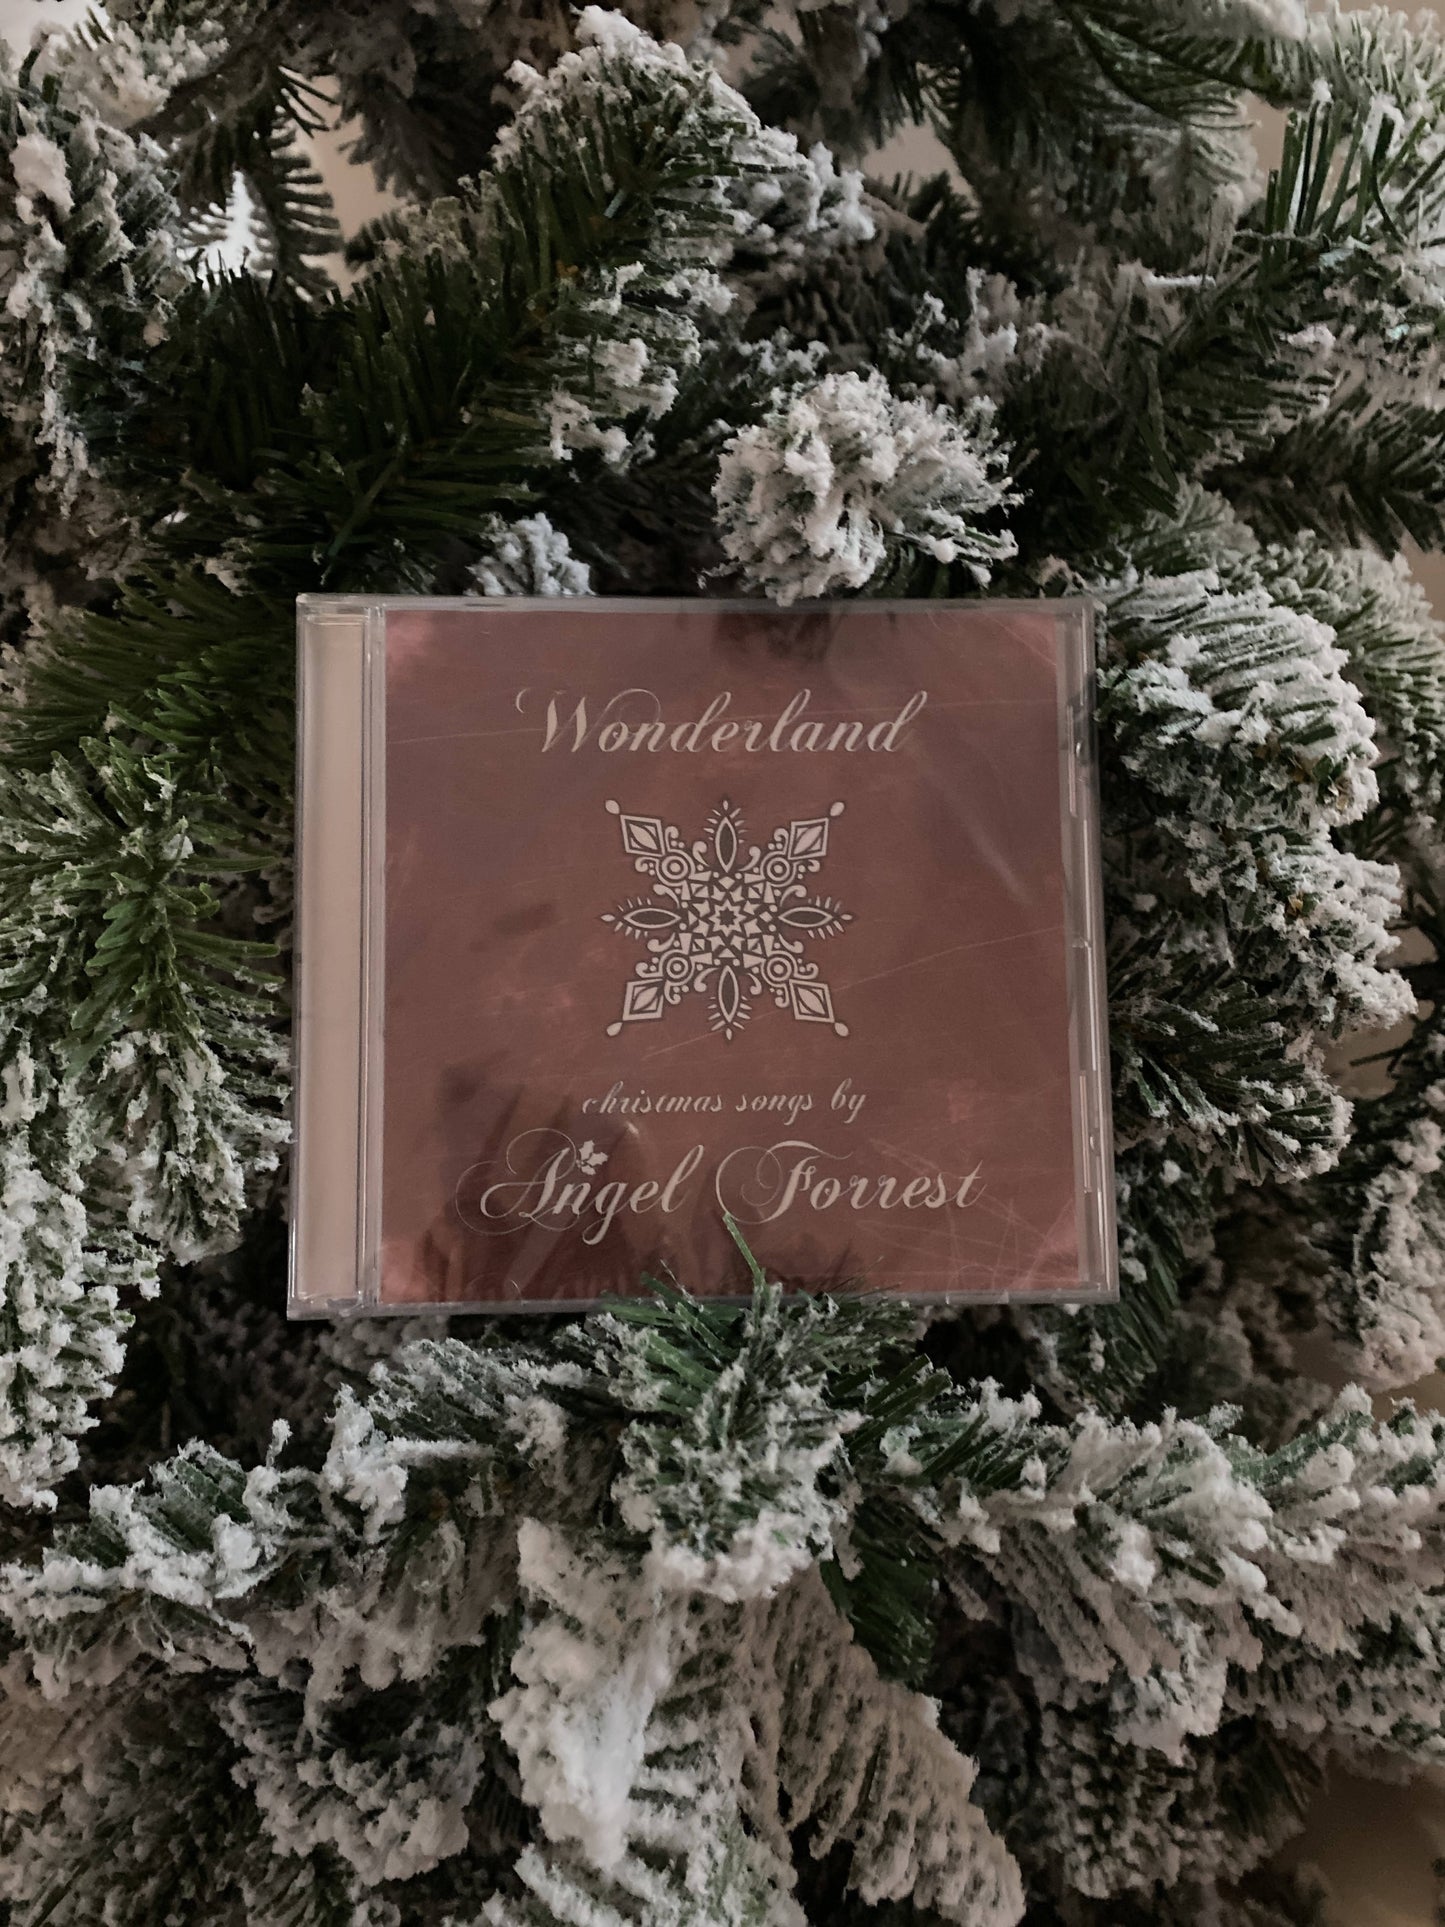 Wonderland - Christmas songs by Angel Forrest